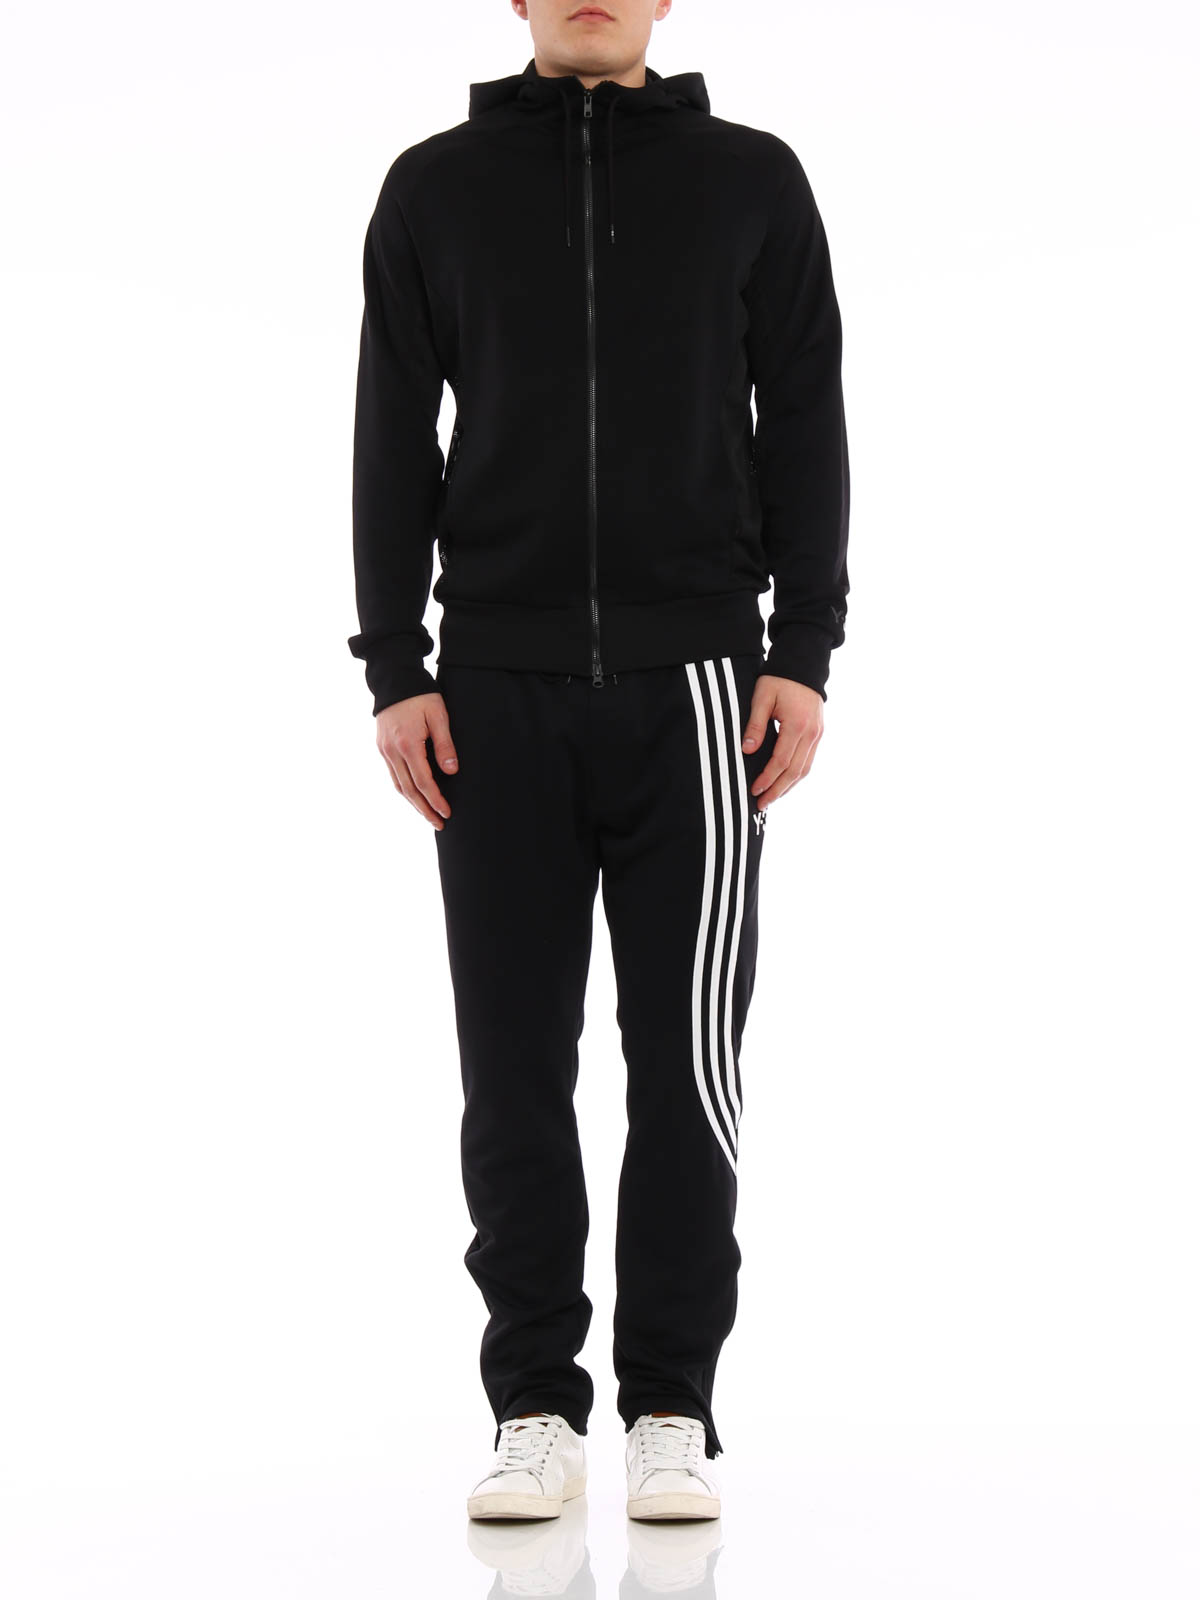 y3 tracksuit bottoms